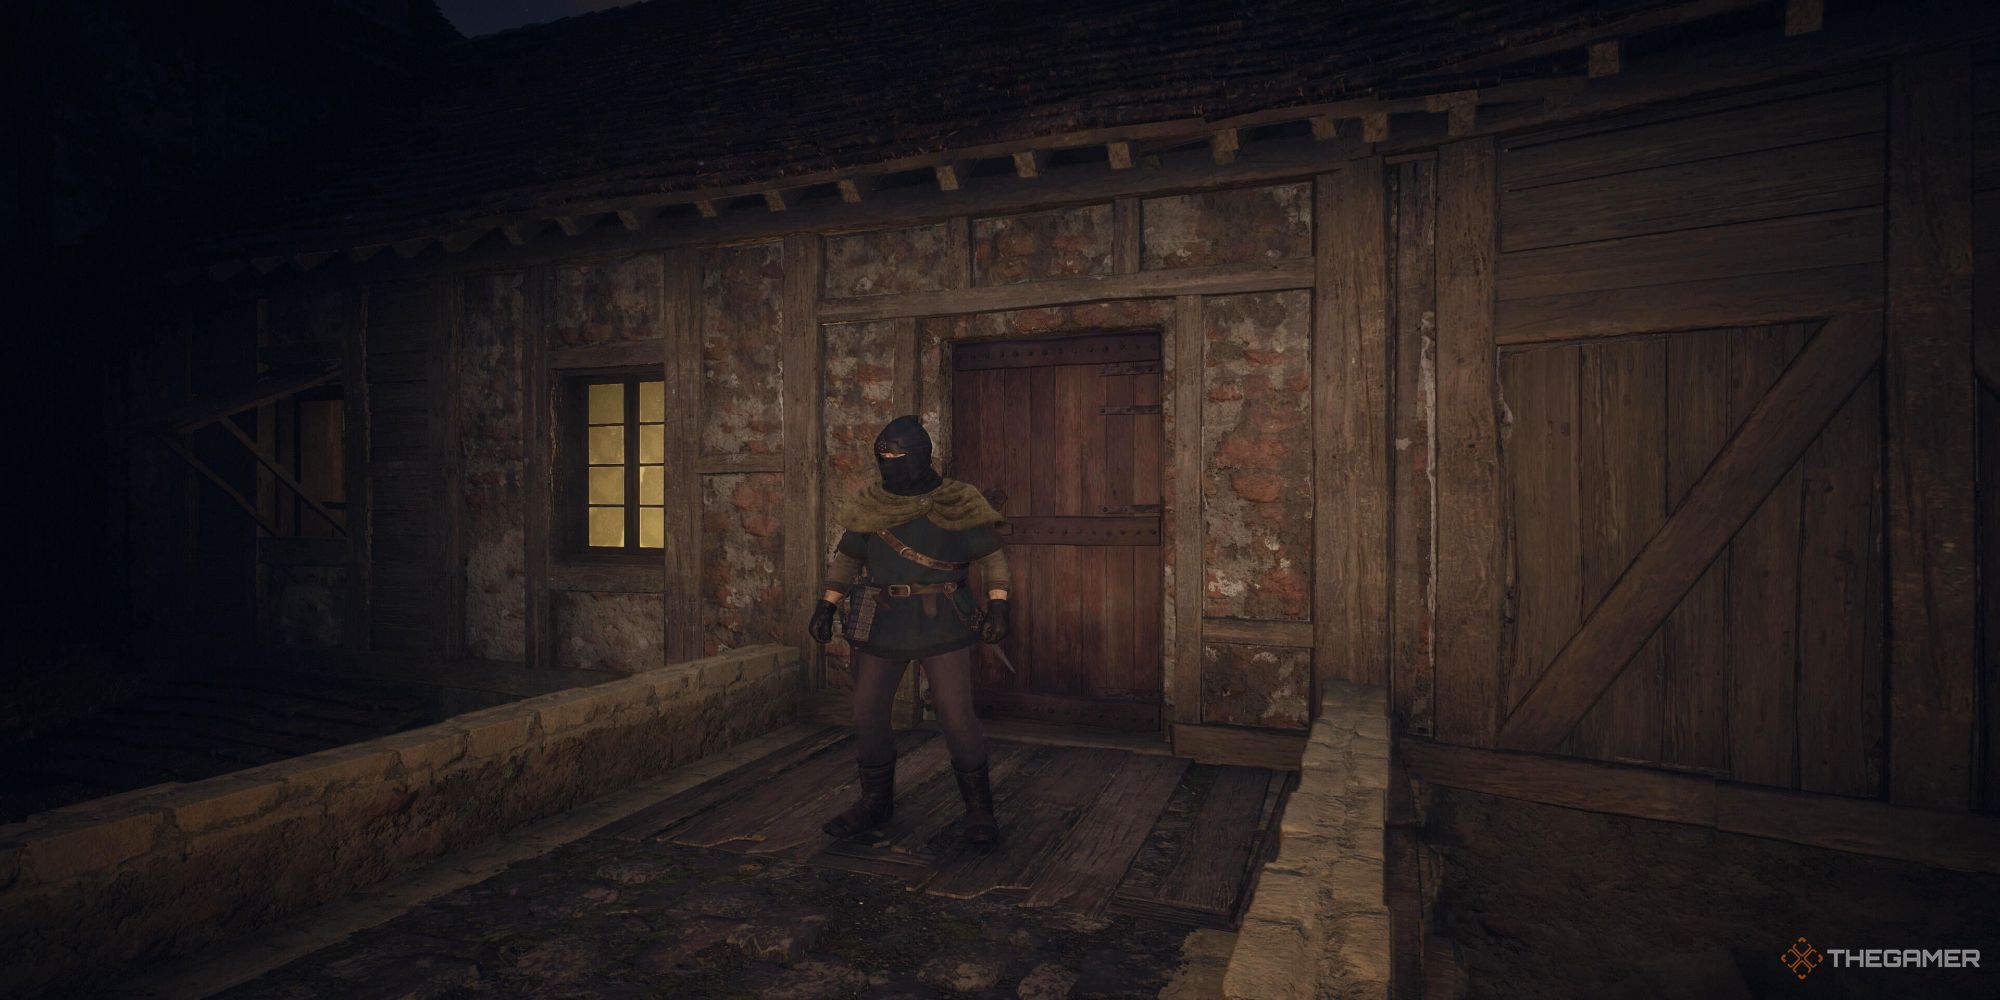 A screenshot from Dragon's Dogma 2 showing the player character thief standing outside of Mildred's Dwelling.